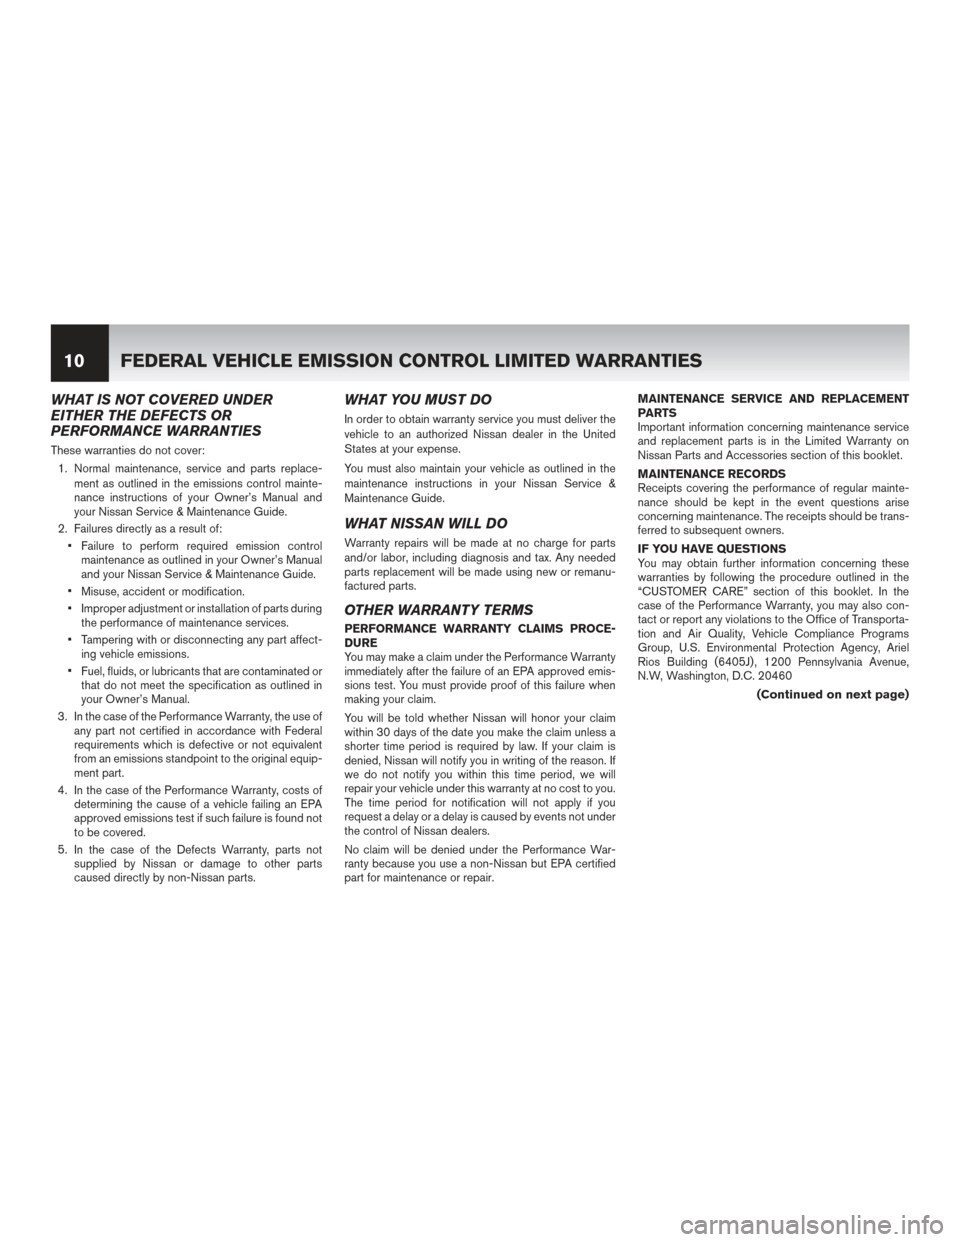 NISSAN MURANO 2014 2.G Warranty Booklet WHAT IS NOT COVERED UNDER
EITHER THE DEFECTS OR
PERFORMANCE WARRANTIES
These warranties do not cover:1. Normal maintenance, service and parts replace- ment as outlined in the emissions control mainte-